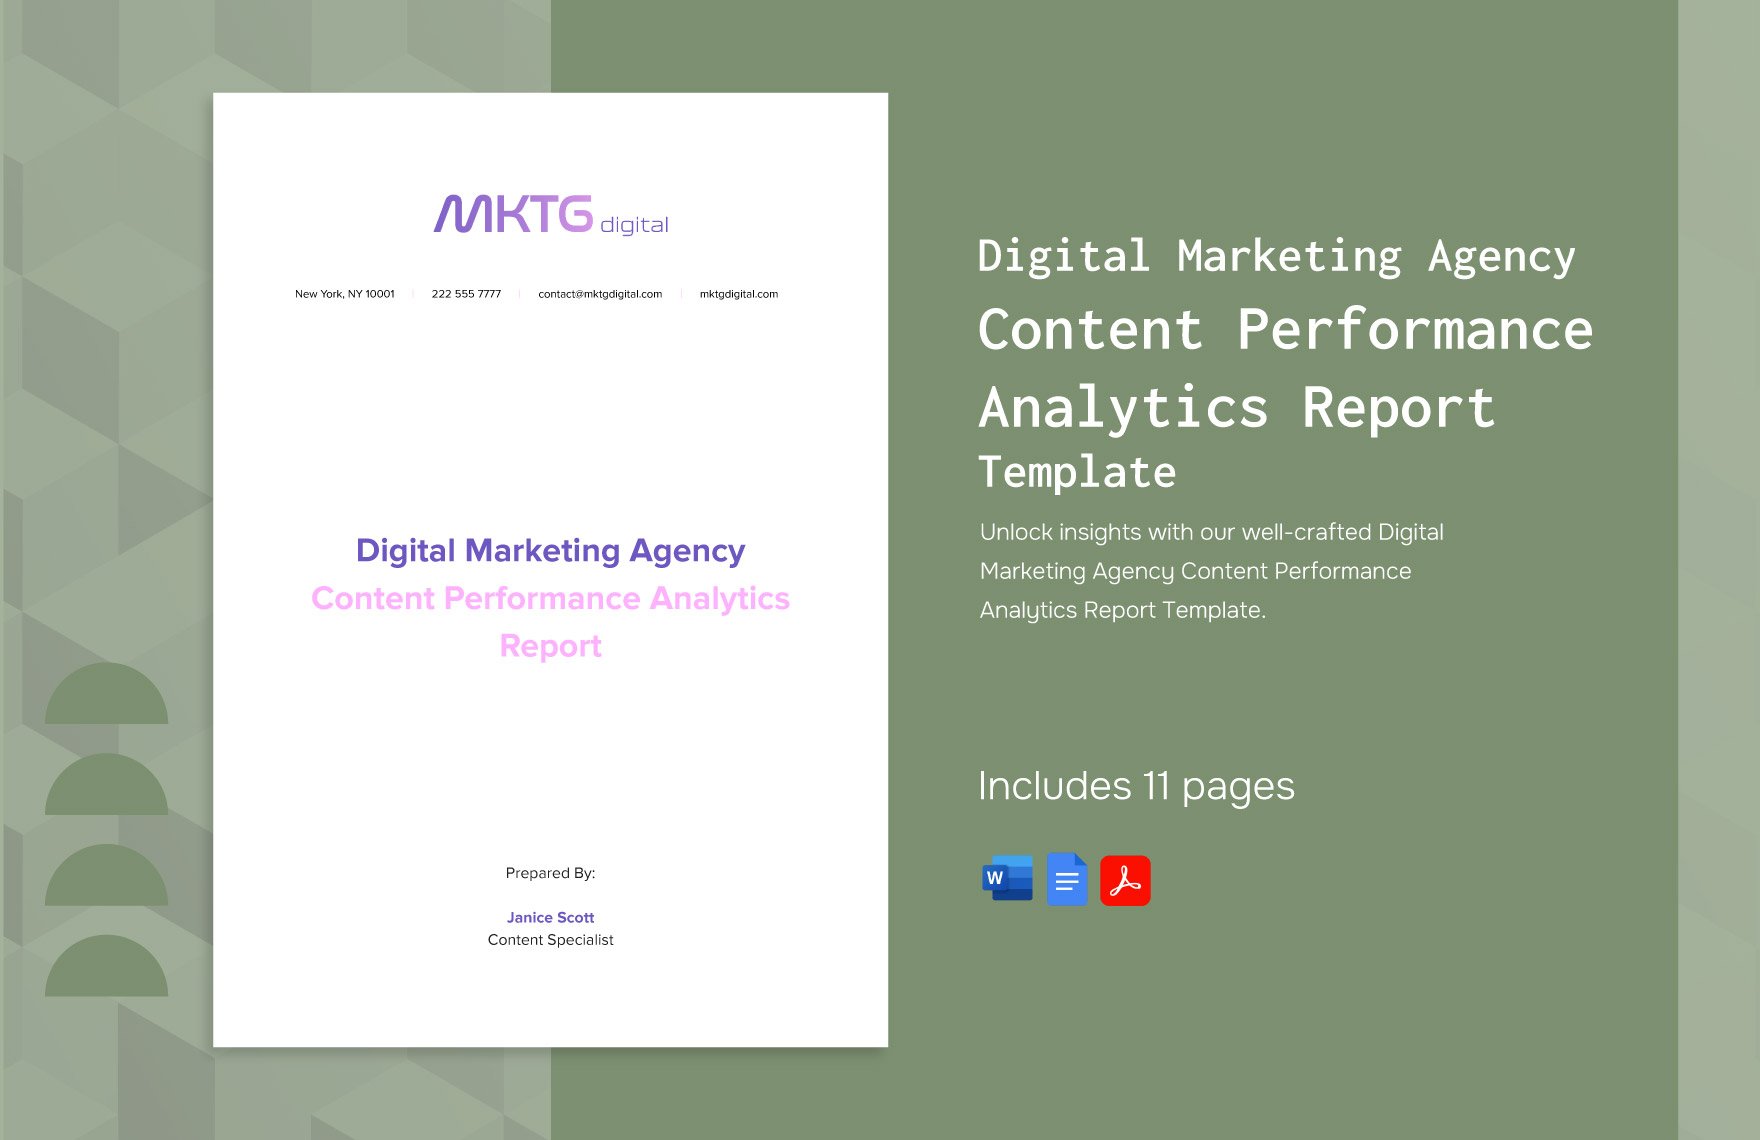 Digital Marketing Agency Content Performance Analytics Report Template